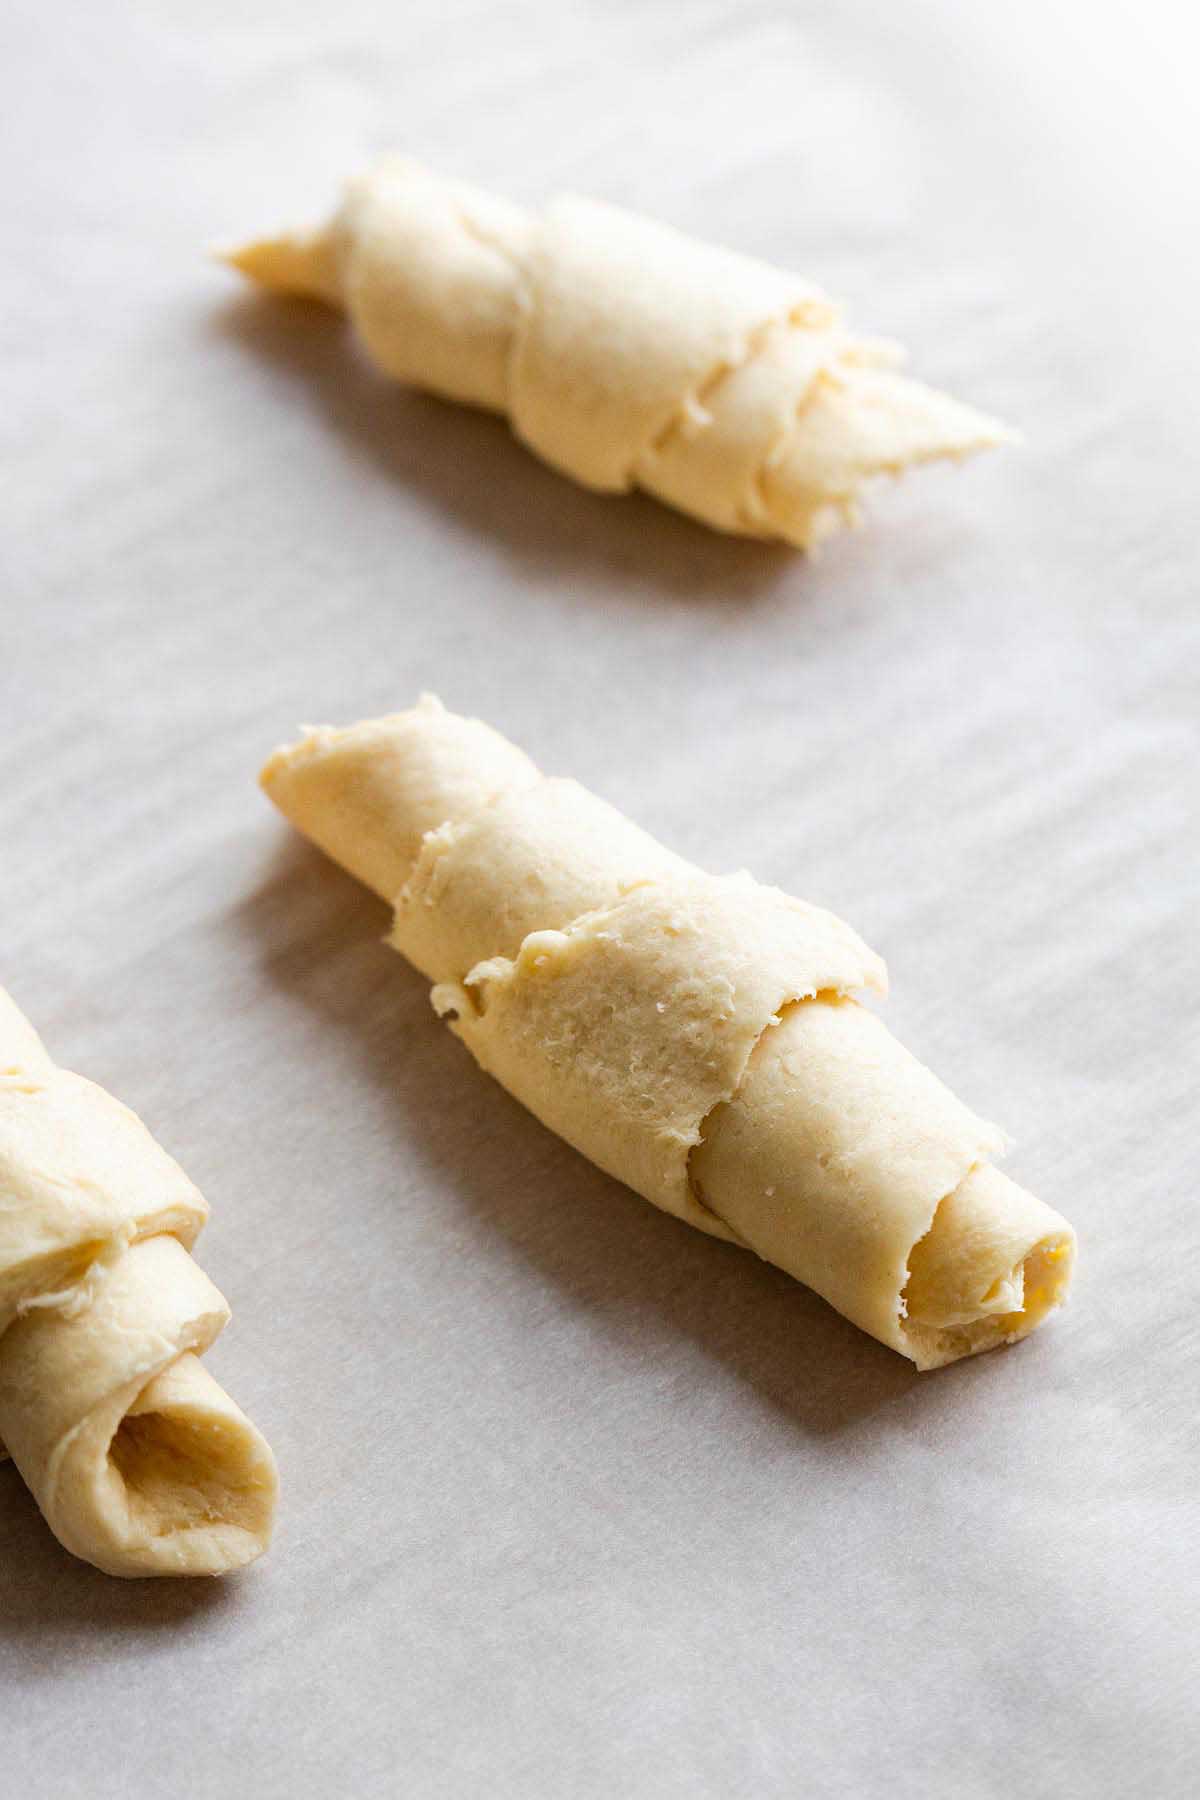 Crescent rolls rolled up.